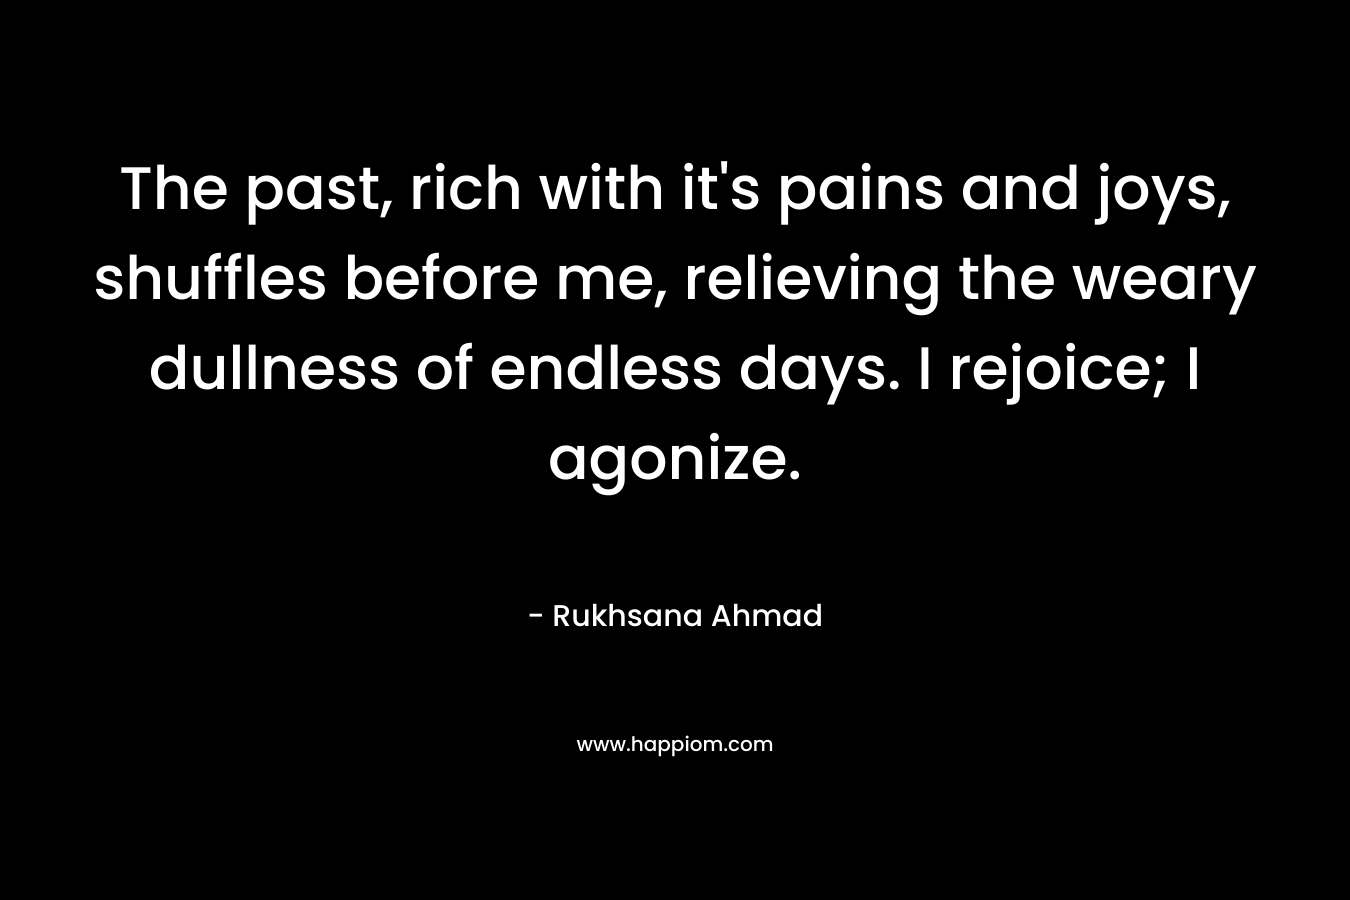 The past, rich with it’s pains and joys, shuffles before me, relieving the weary dullness of endless days. I rejoice; I agonize. – Rukhsana Ahmad